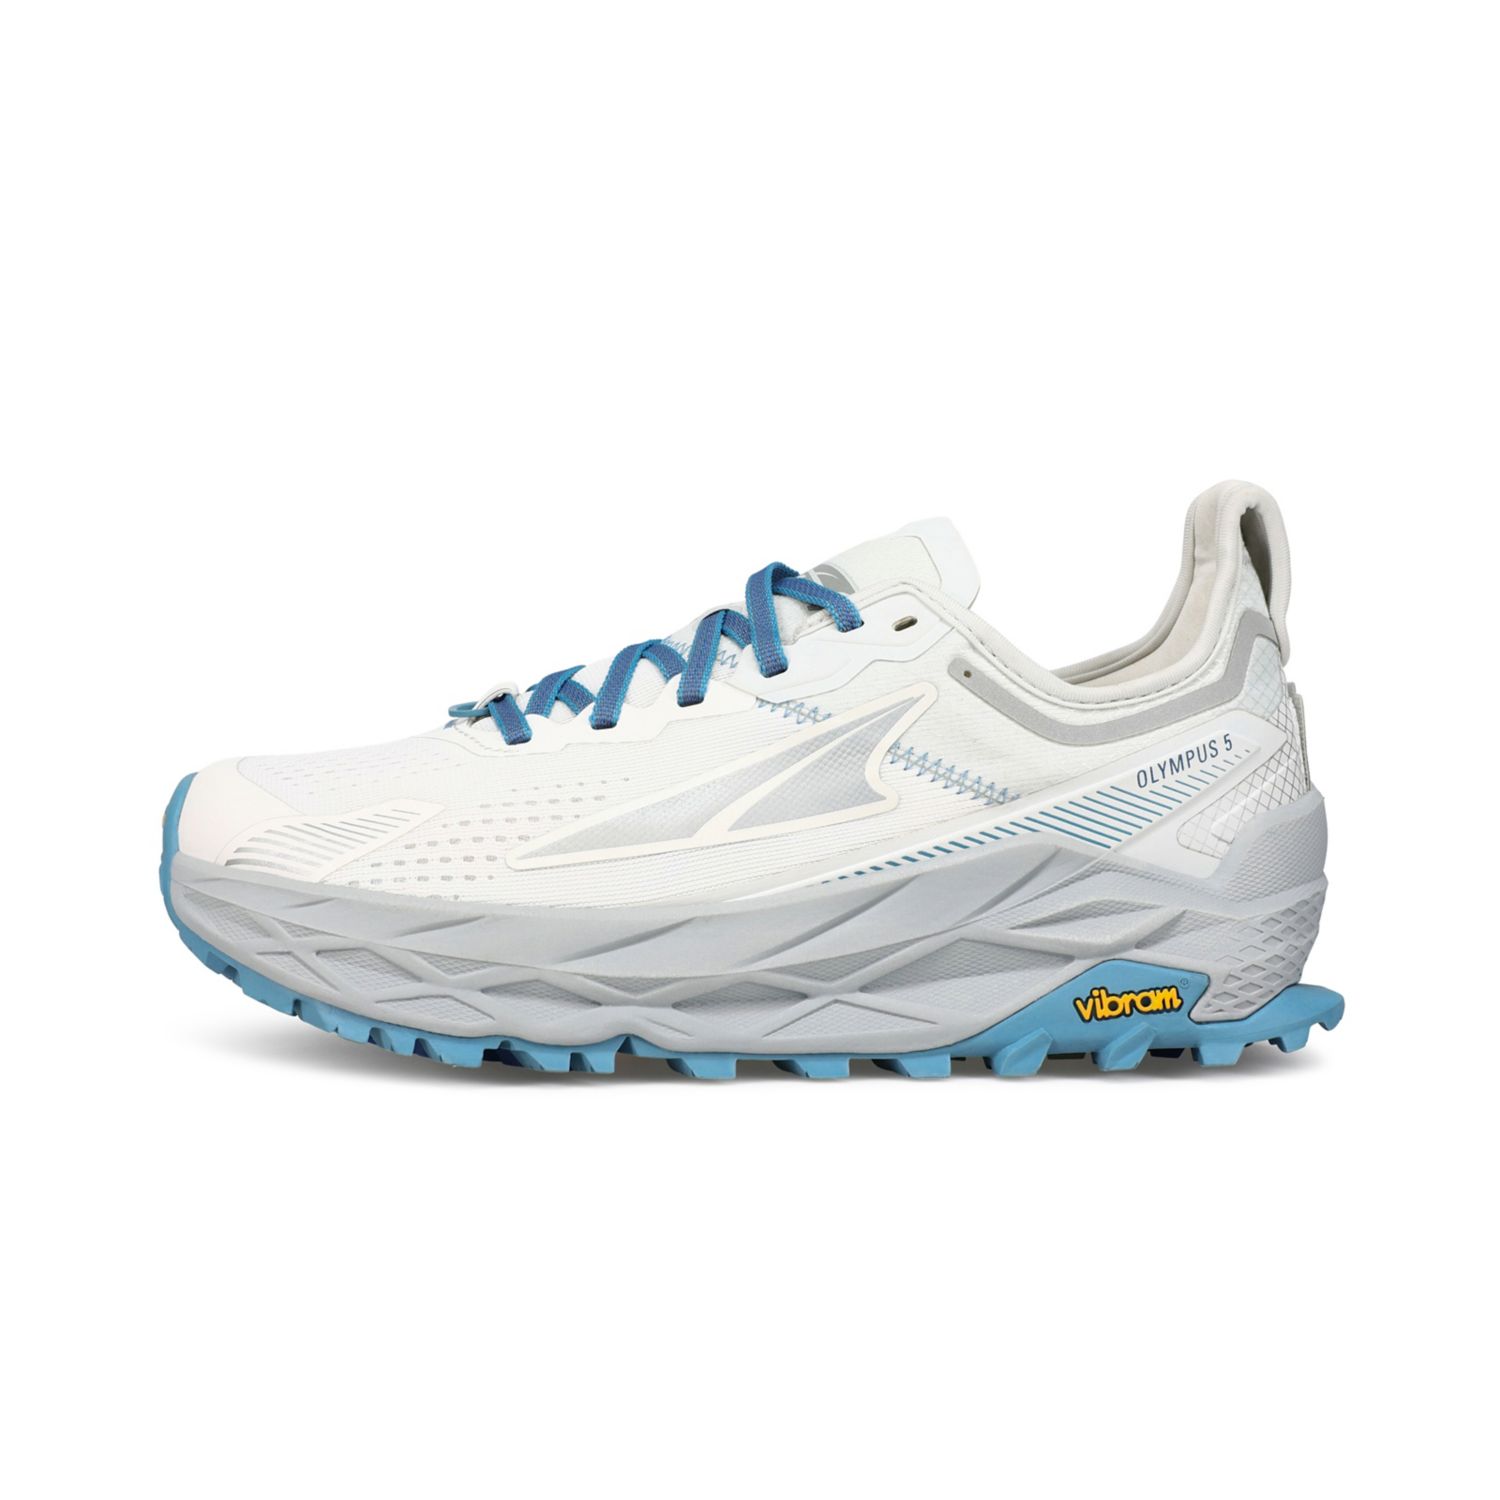 Altra Olympus 5 Women's Trail Running Shoes White / Blue | South Africa-79416539